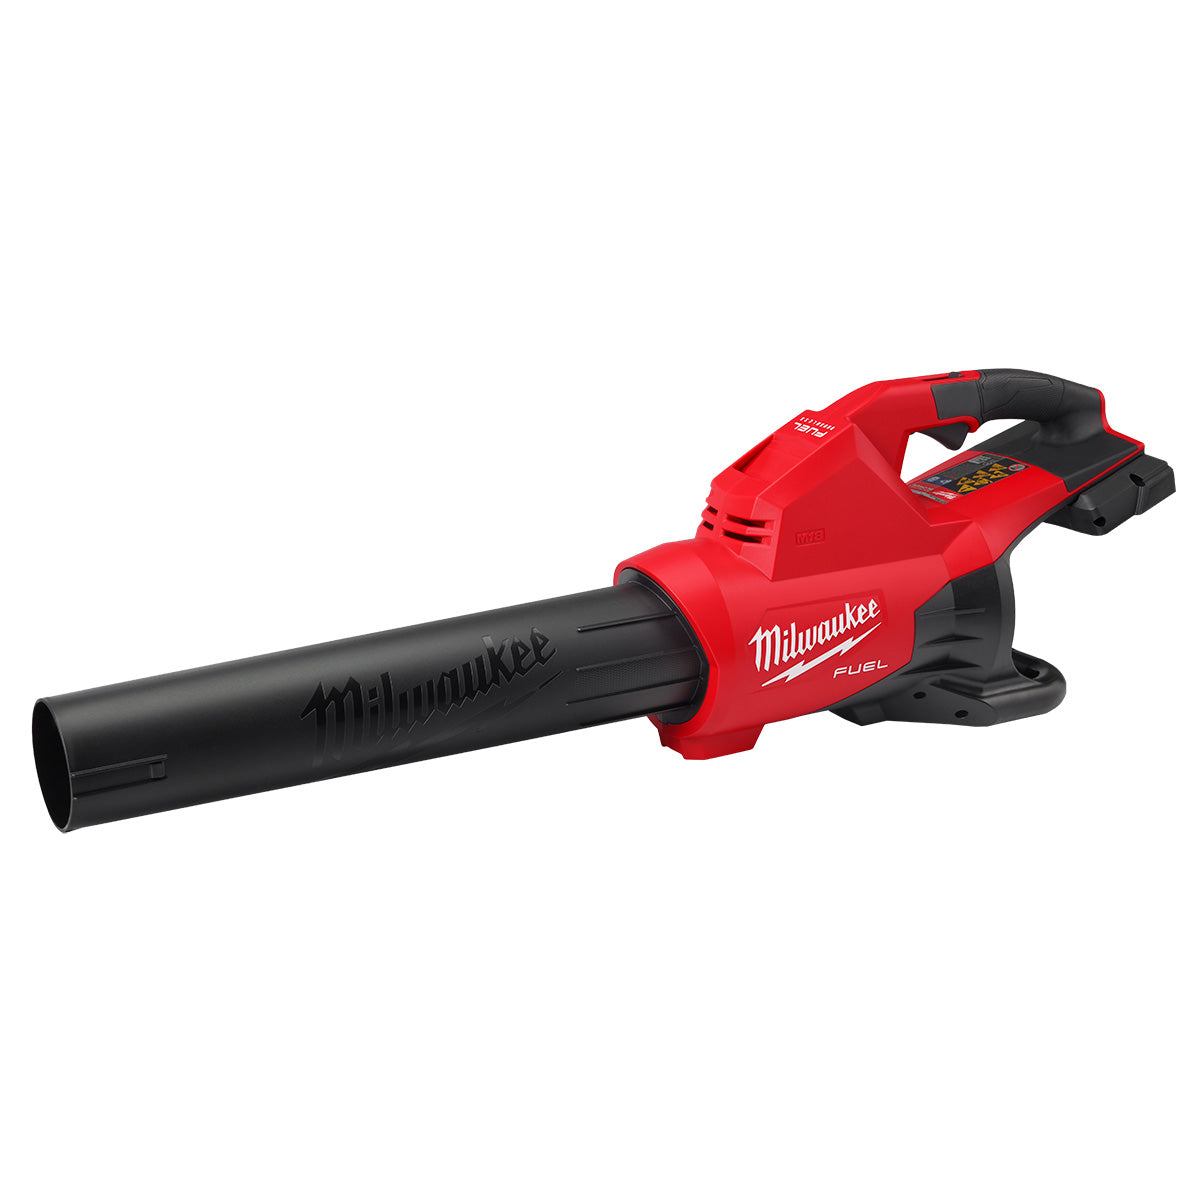 MILWAUKEE  2824-20  M18 FUEL™ Dual Battery Blower - Tool Only